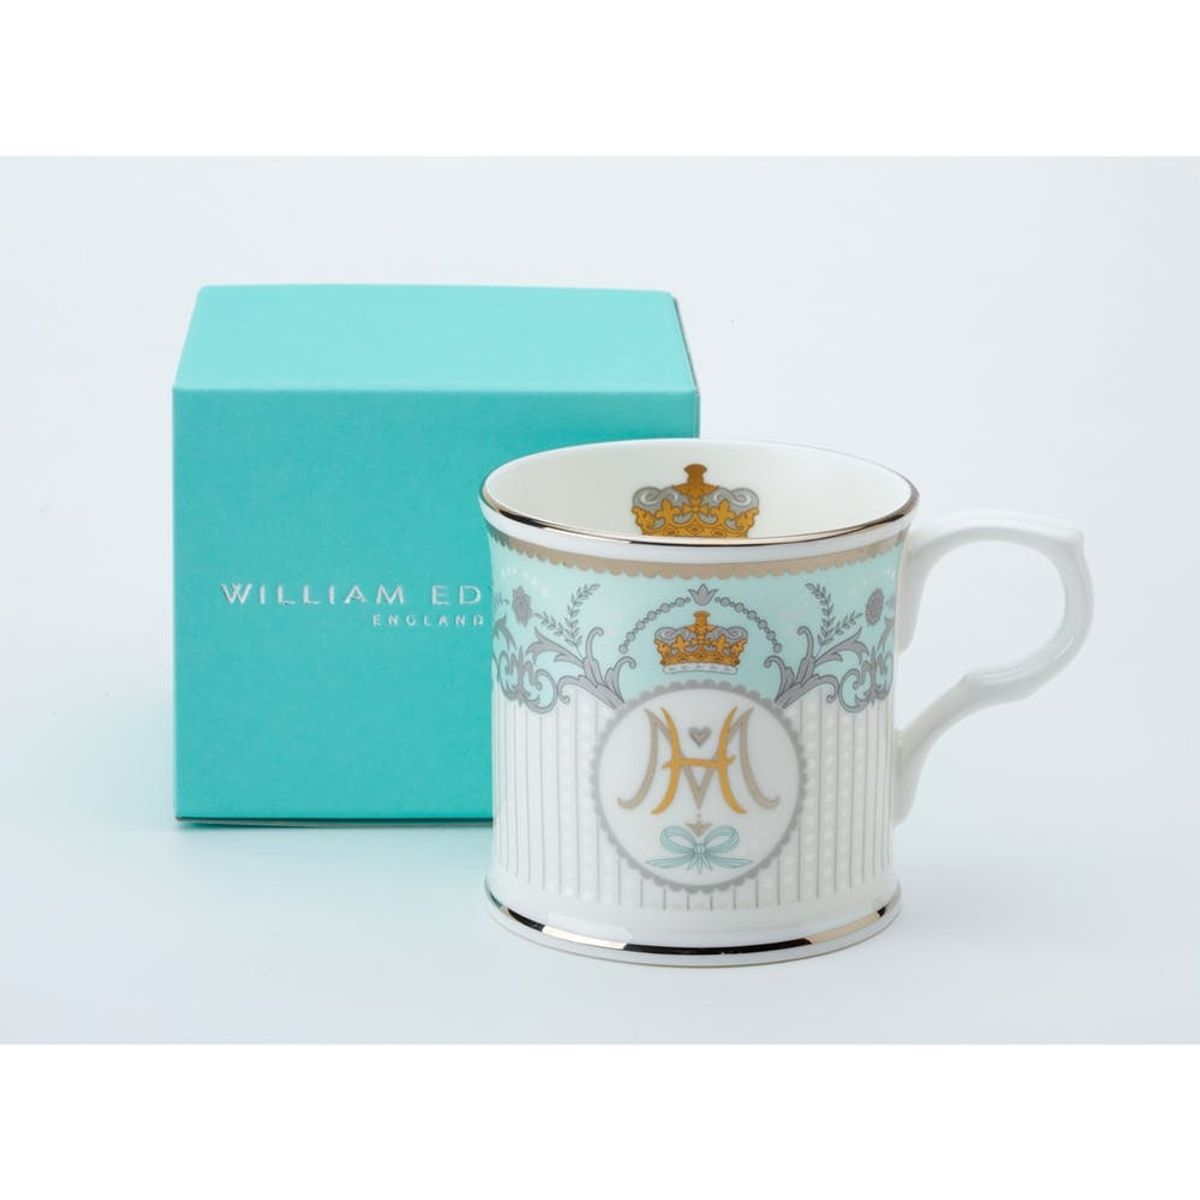 This Royal Wedding Themed Teaware Collection Will Make You Feel Like a Legit Princess